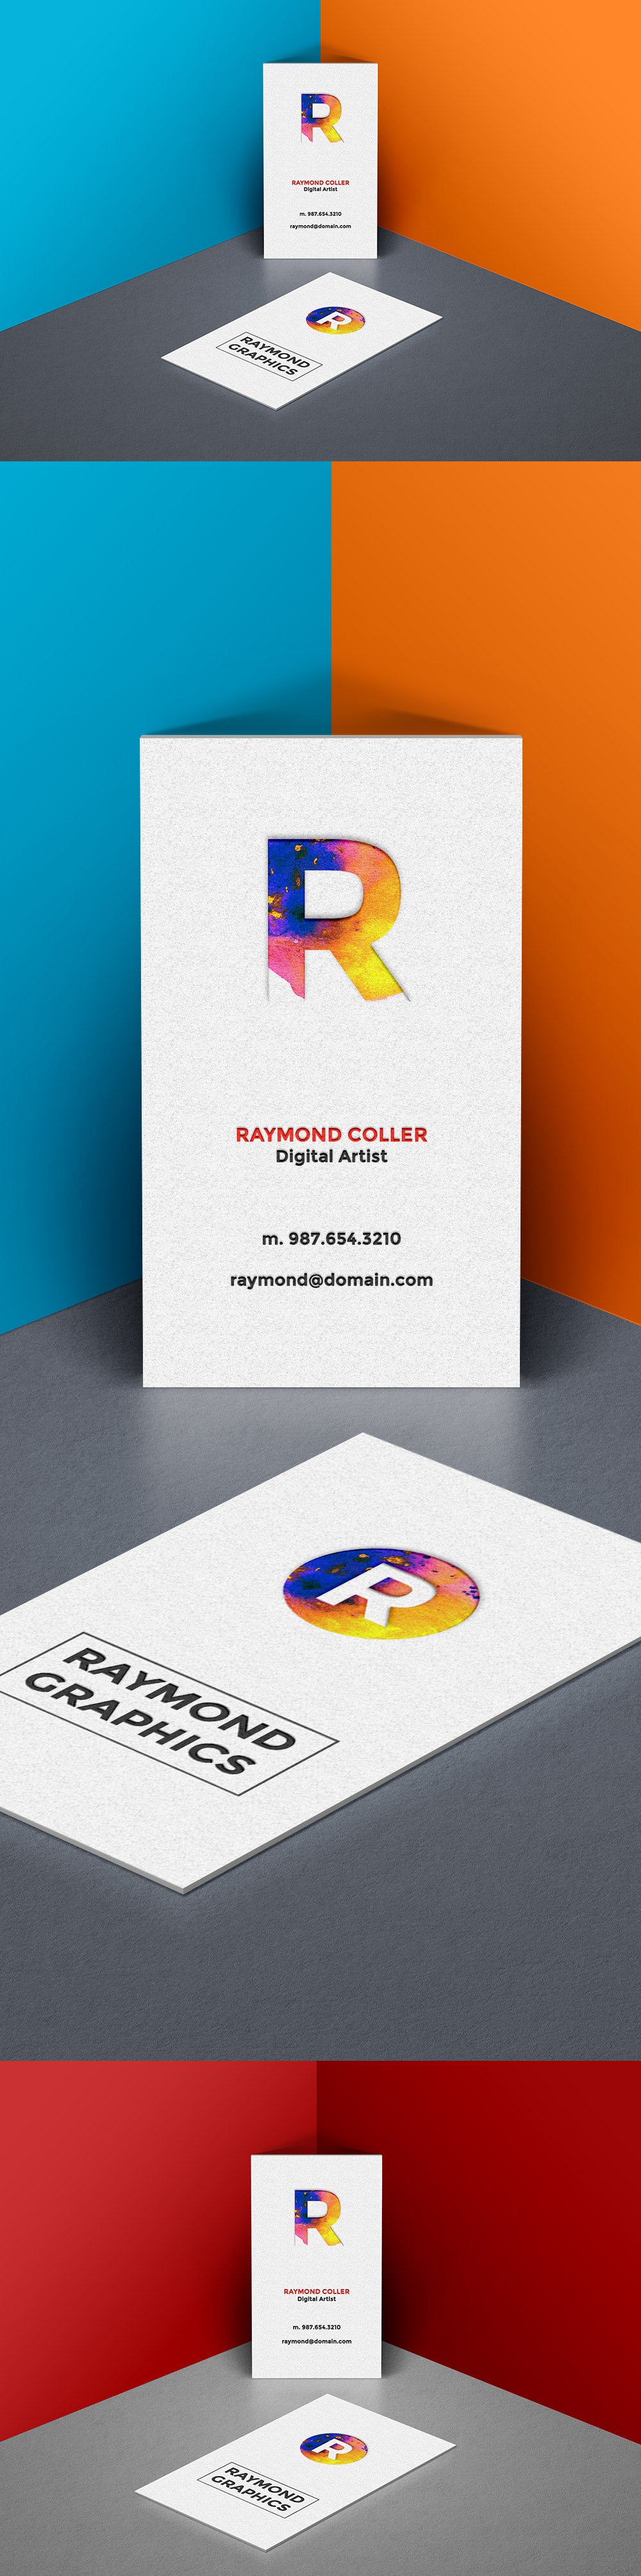 Free Business Card Mockup in Isometric Corner PSD Template